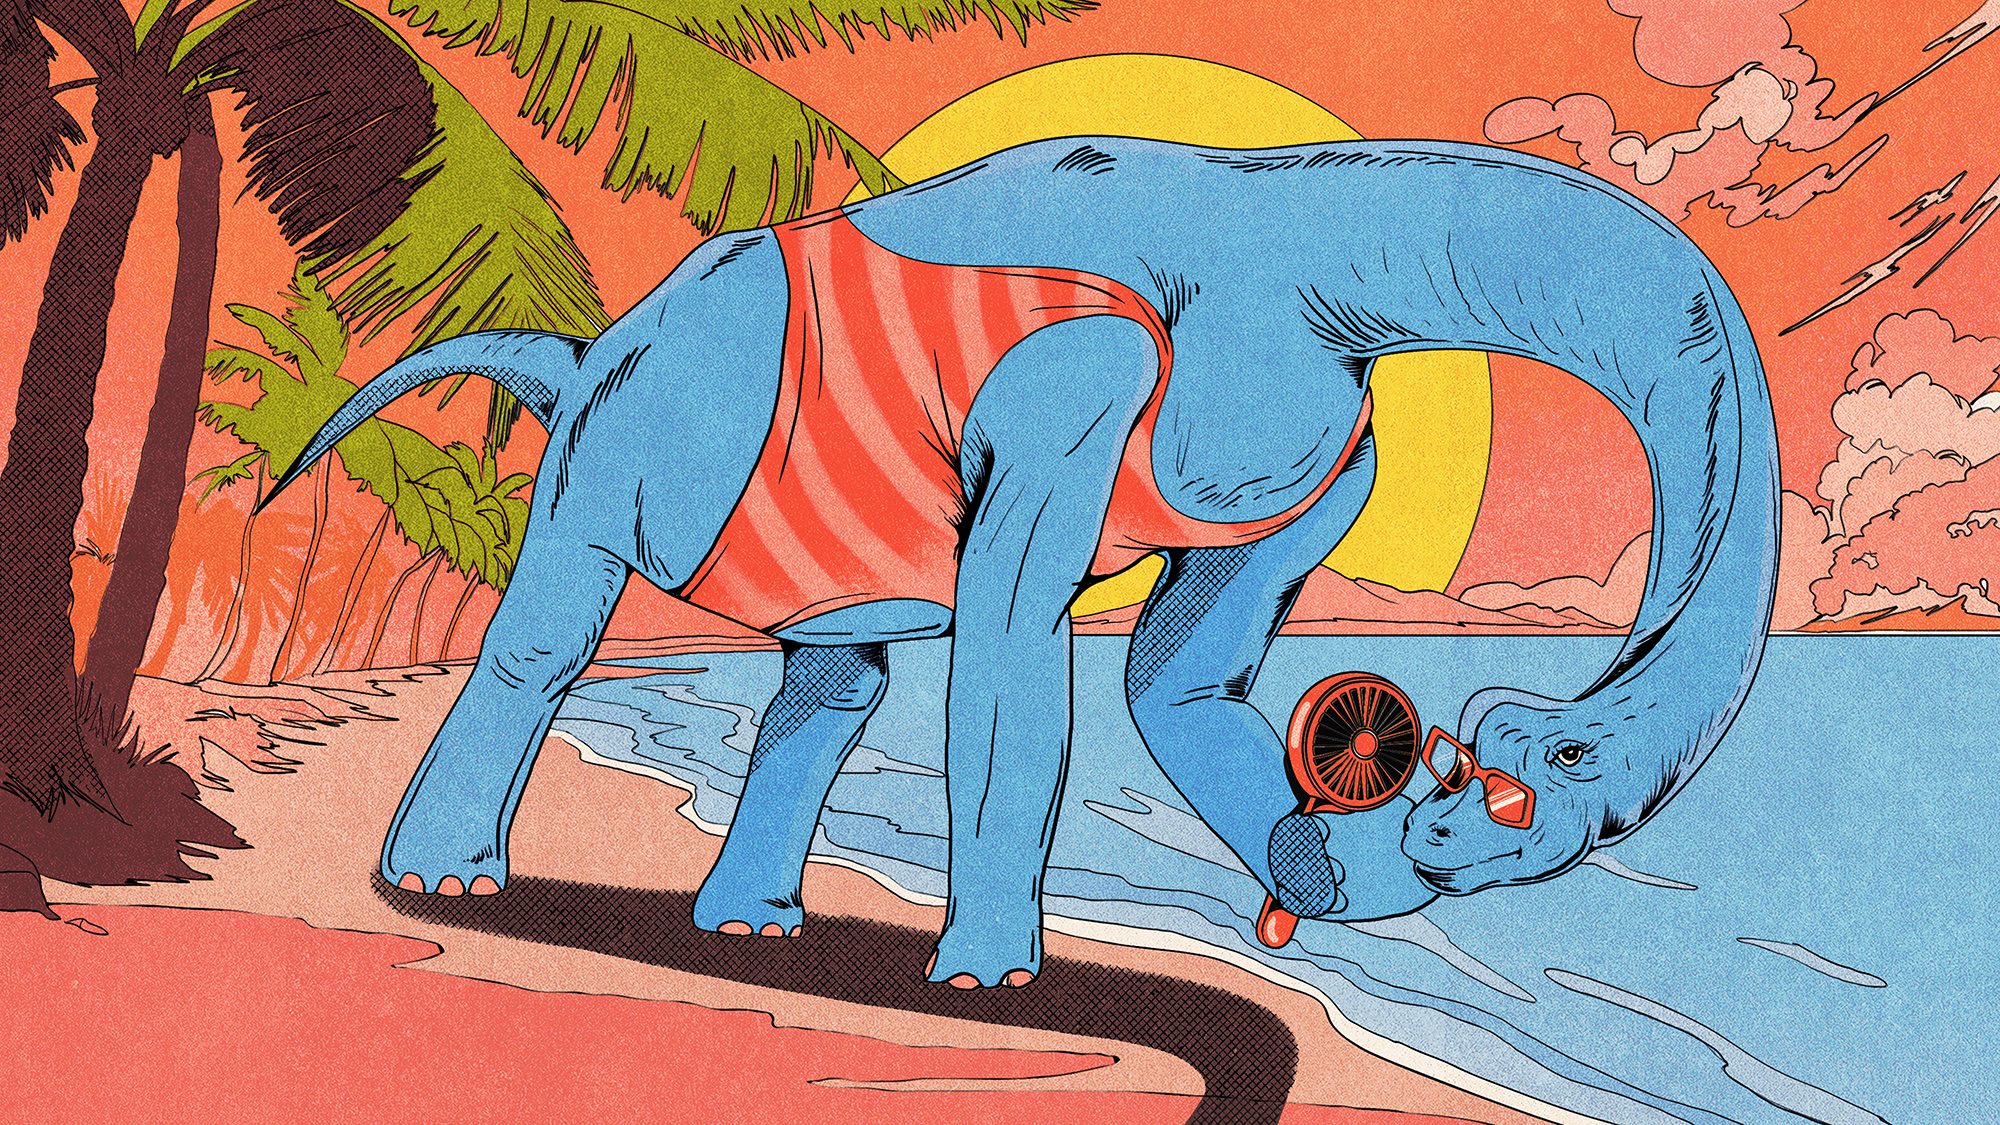 Brachiosaurus in bathing suit stands on a beach with a handheld fan to show that dinosaurs might have been warm-blooded. Illustrated.